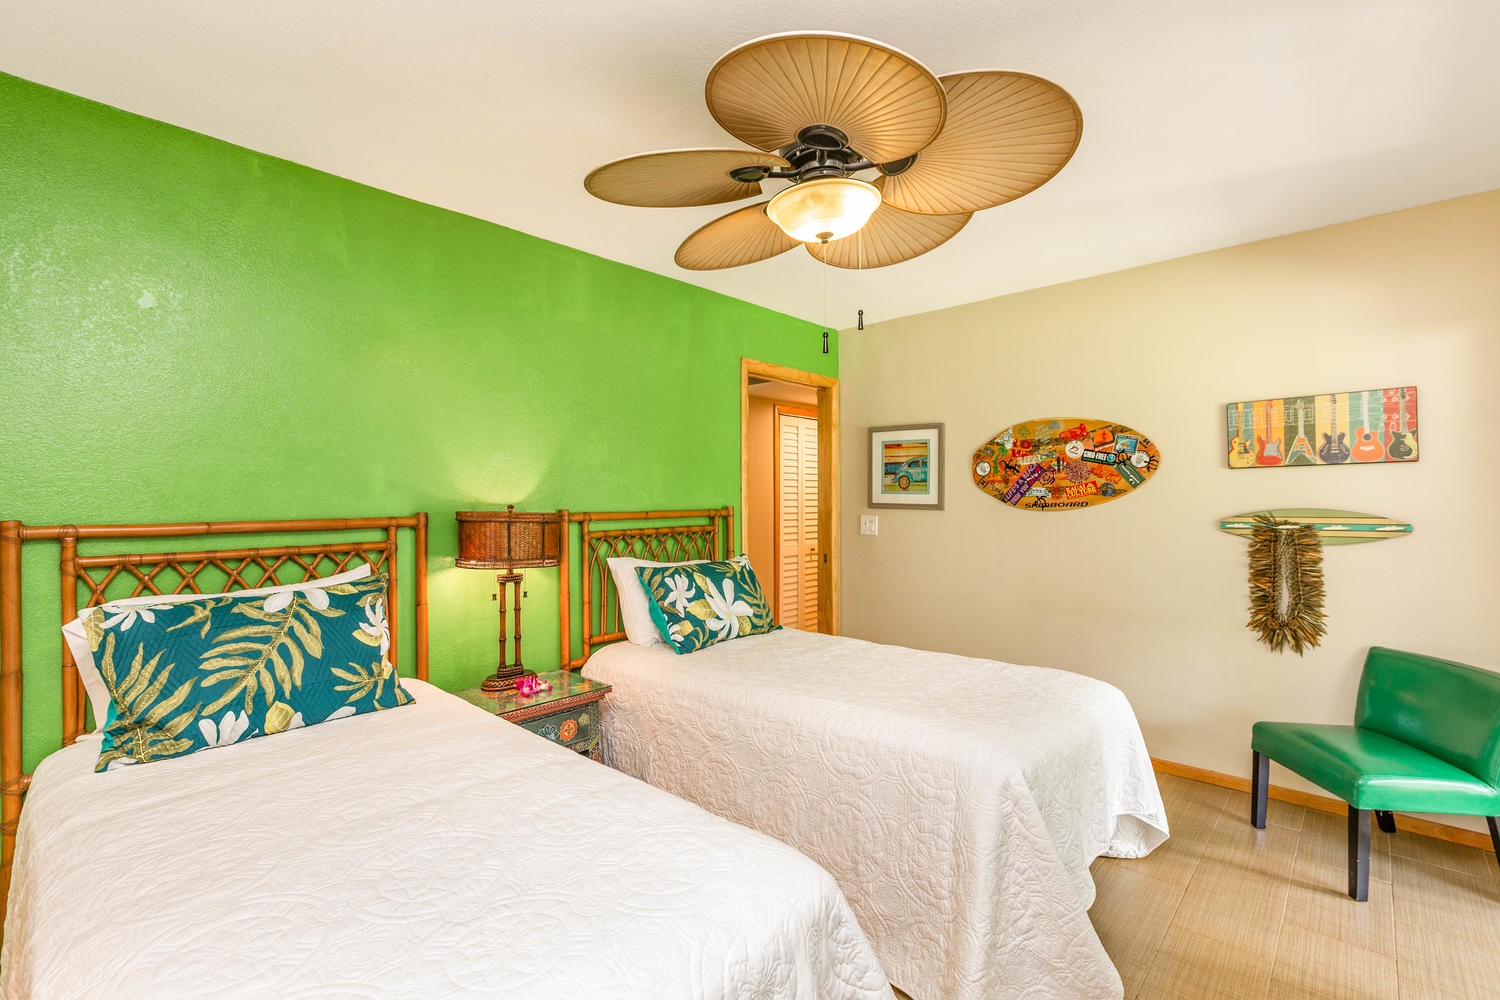 Princeville Vacation Rentals, Hale Anu Keanu - Downstairs twin bedroom